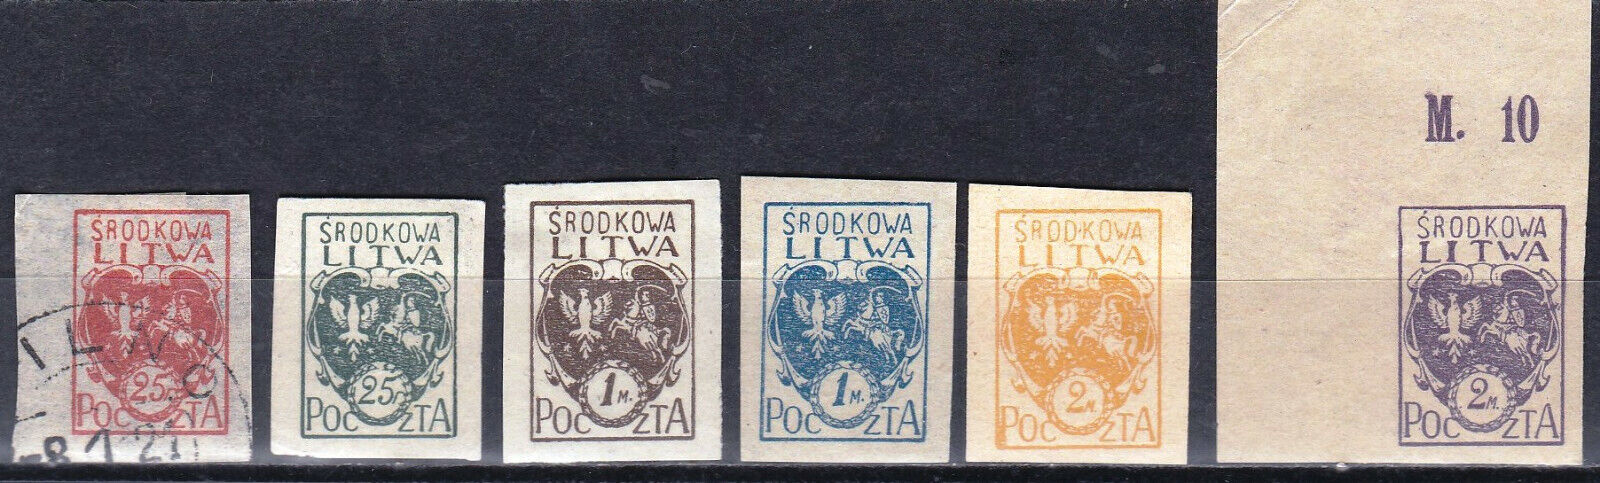 CENTRAL LITHUANIA - Sc 1 - 6 IMPERF. SET - LOOK